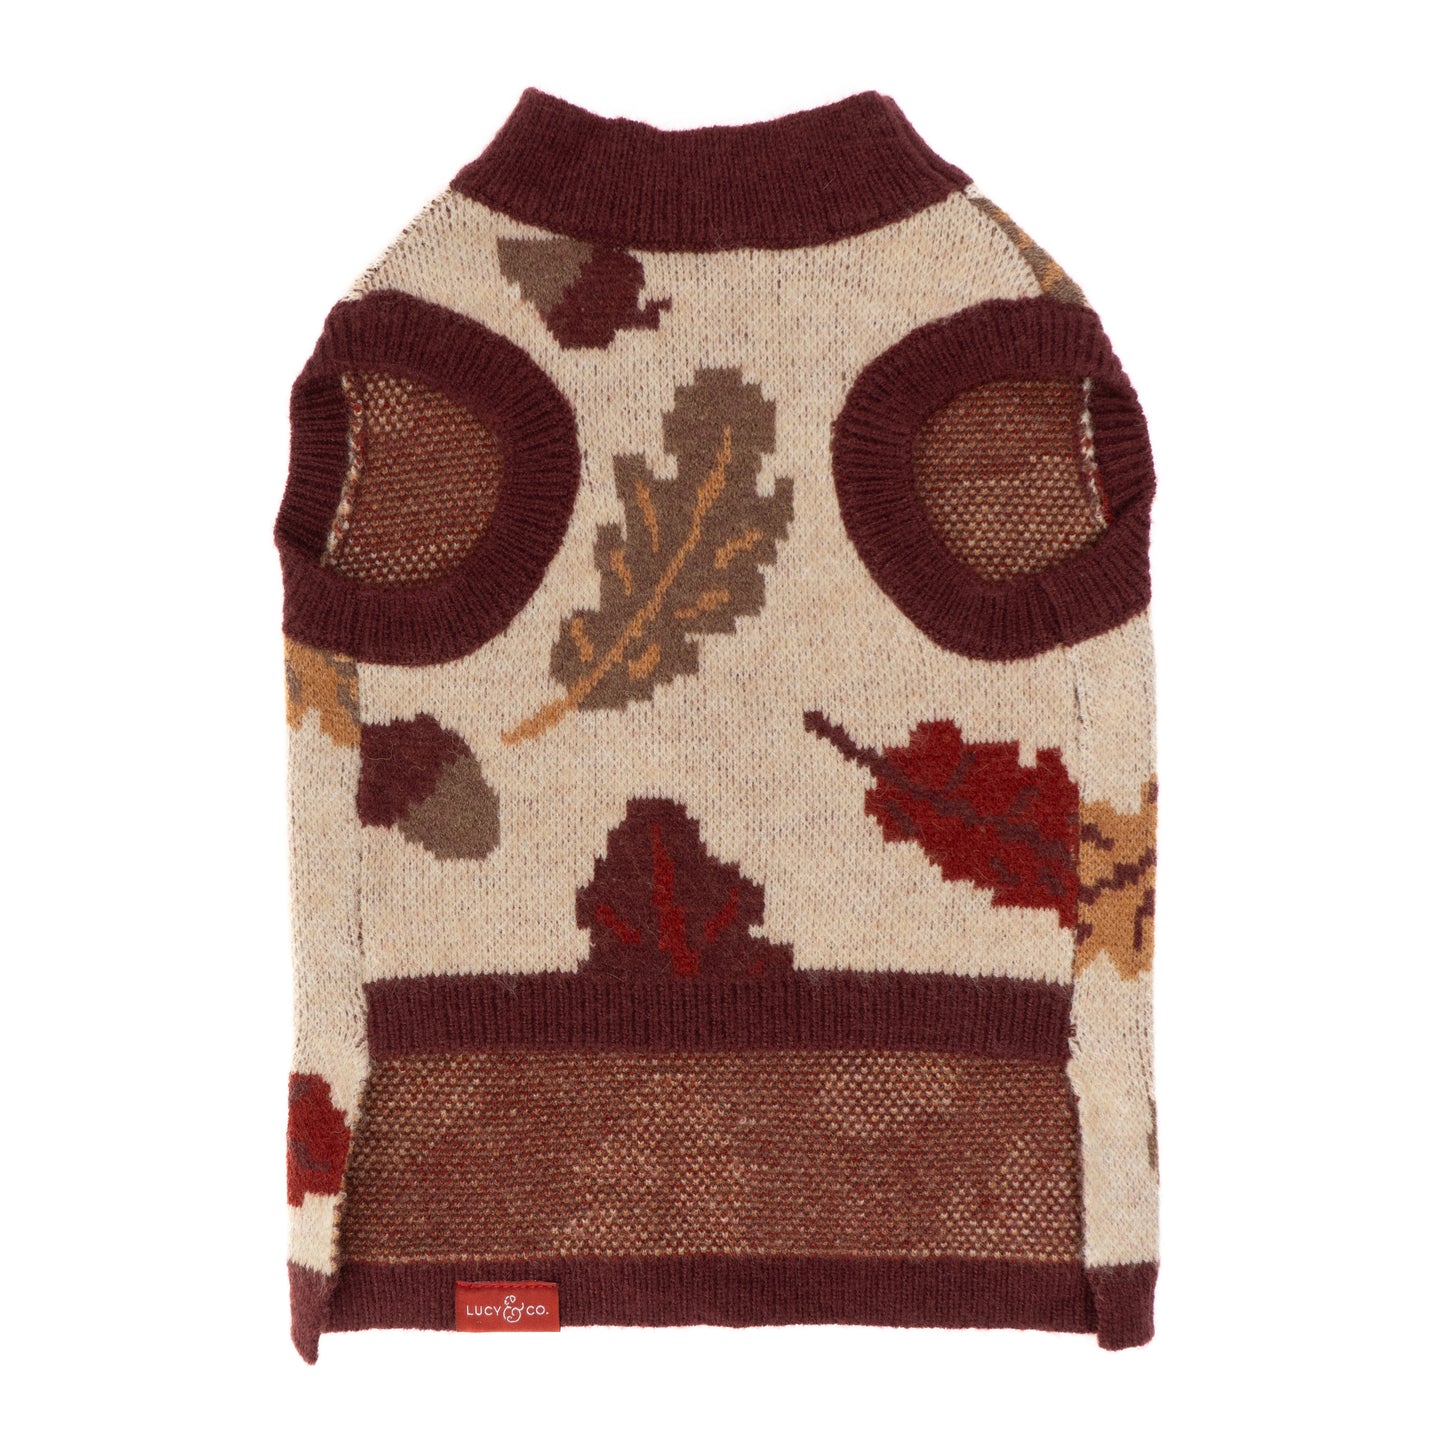 The Unbeleafable Sweater